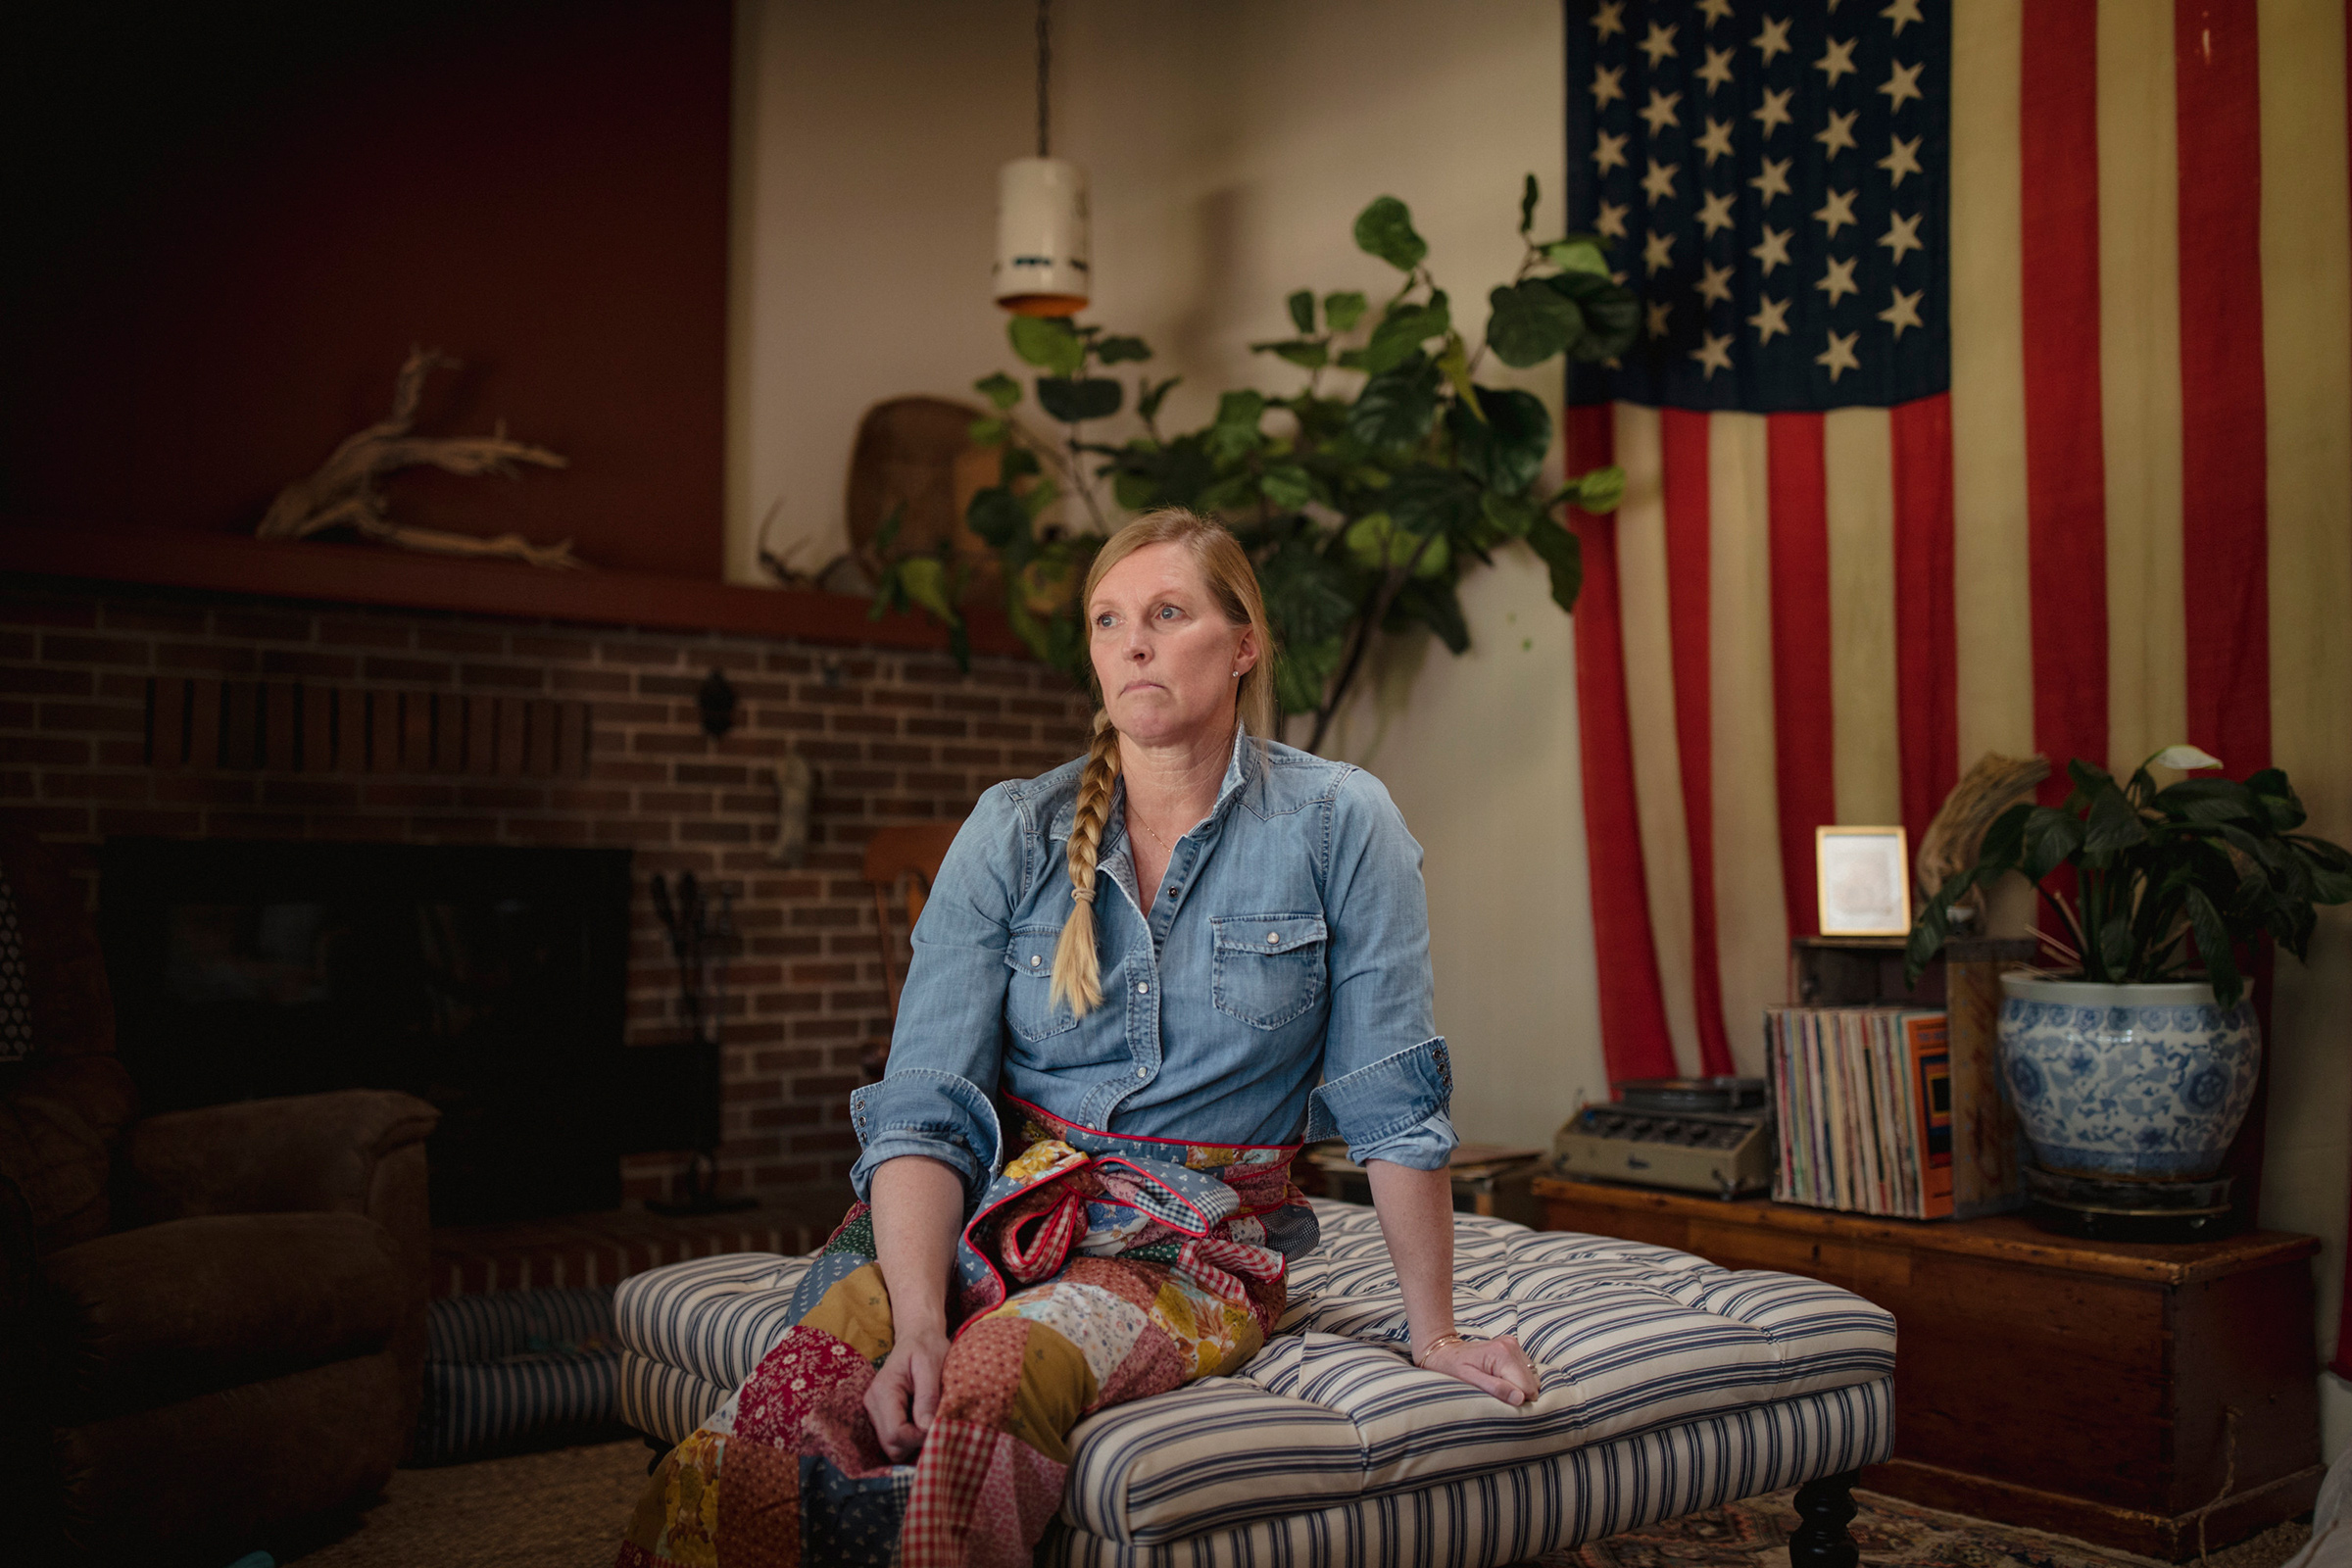 Crissy Perham at her home in Rociada, N.M., on Sept. 24, 2021. Perham was one of more than 500 female athletes who filed an amicus brief last September supporting Roe v. Wade. (Adria Malcolm—The New York Times/Redux)